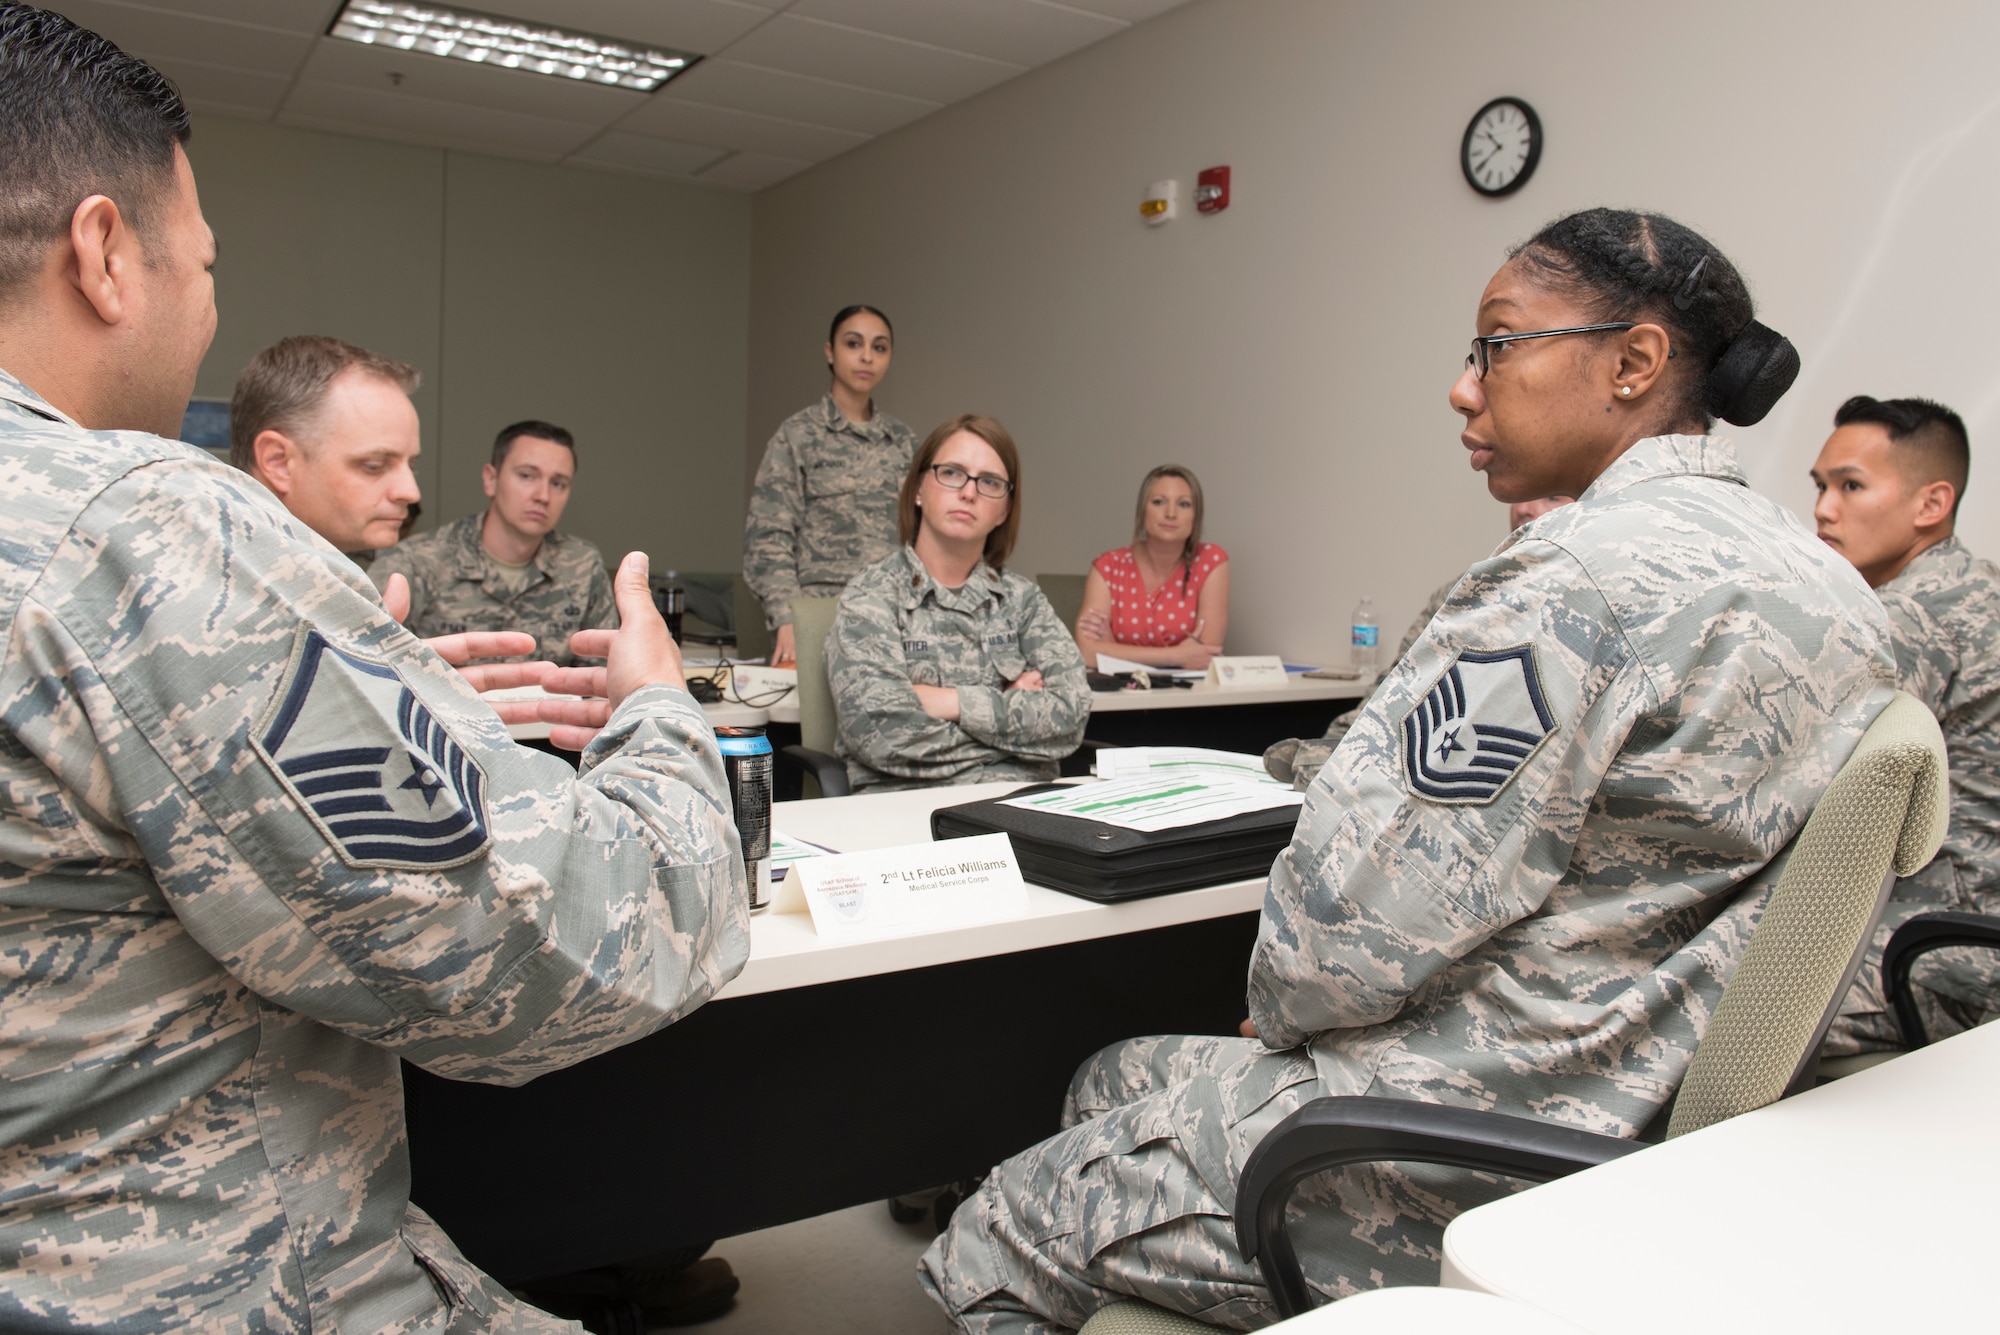 Students brainstorm capstone solutions for the Basic Leadership Airman Skills Training Course in a classroom at USAFSAM, Wright-Patterson Air Force Base, Ohio, May 25, 2018.